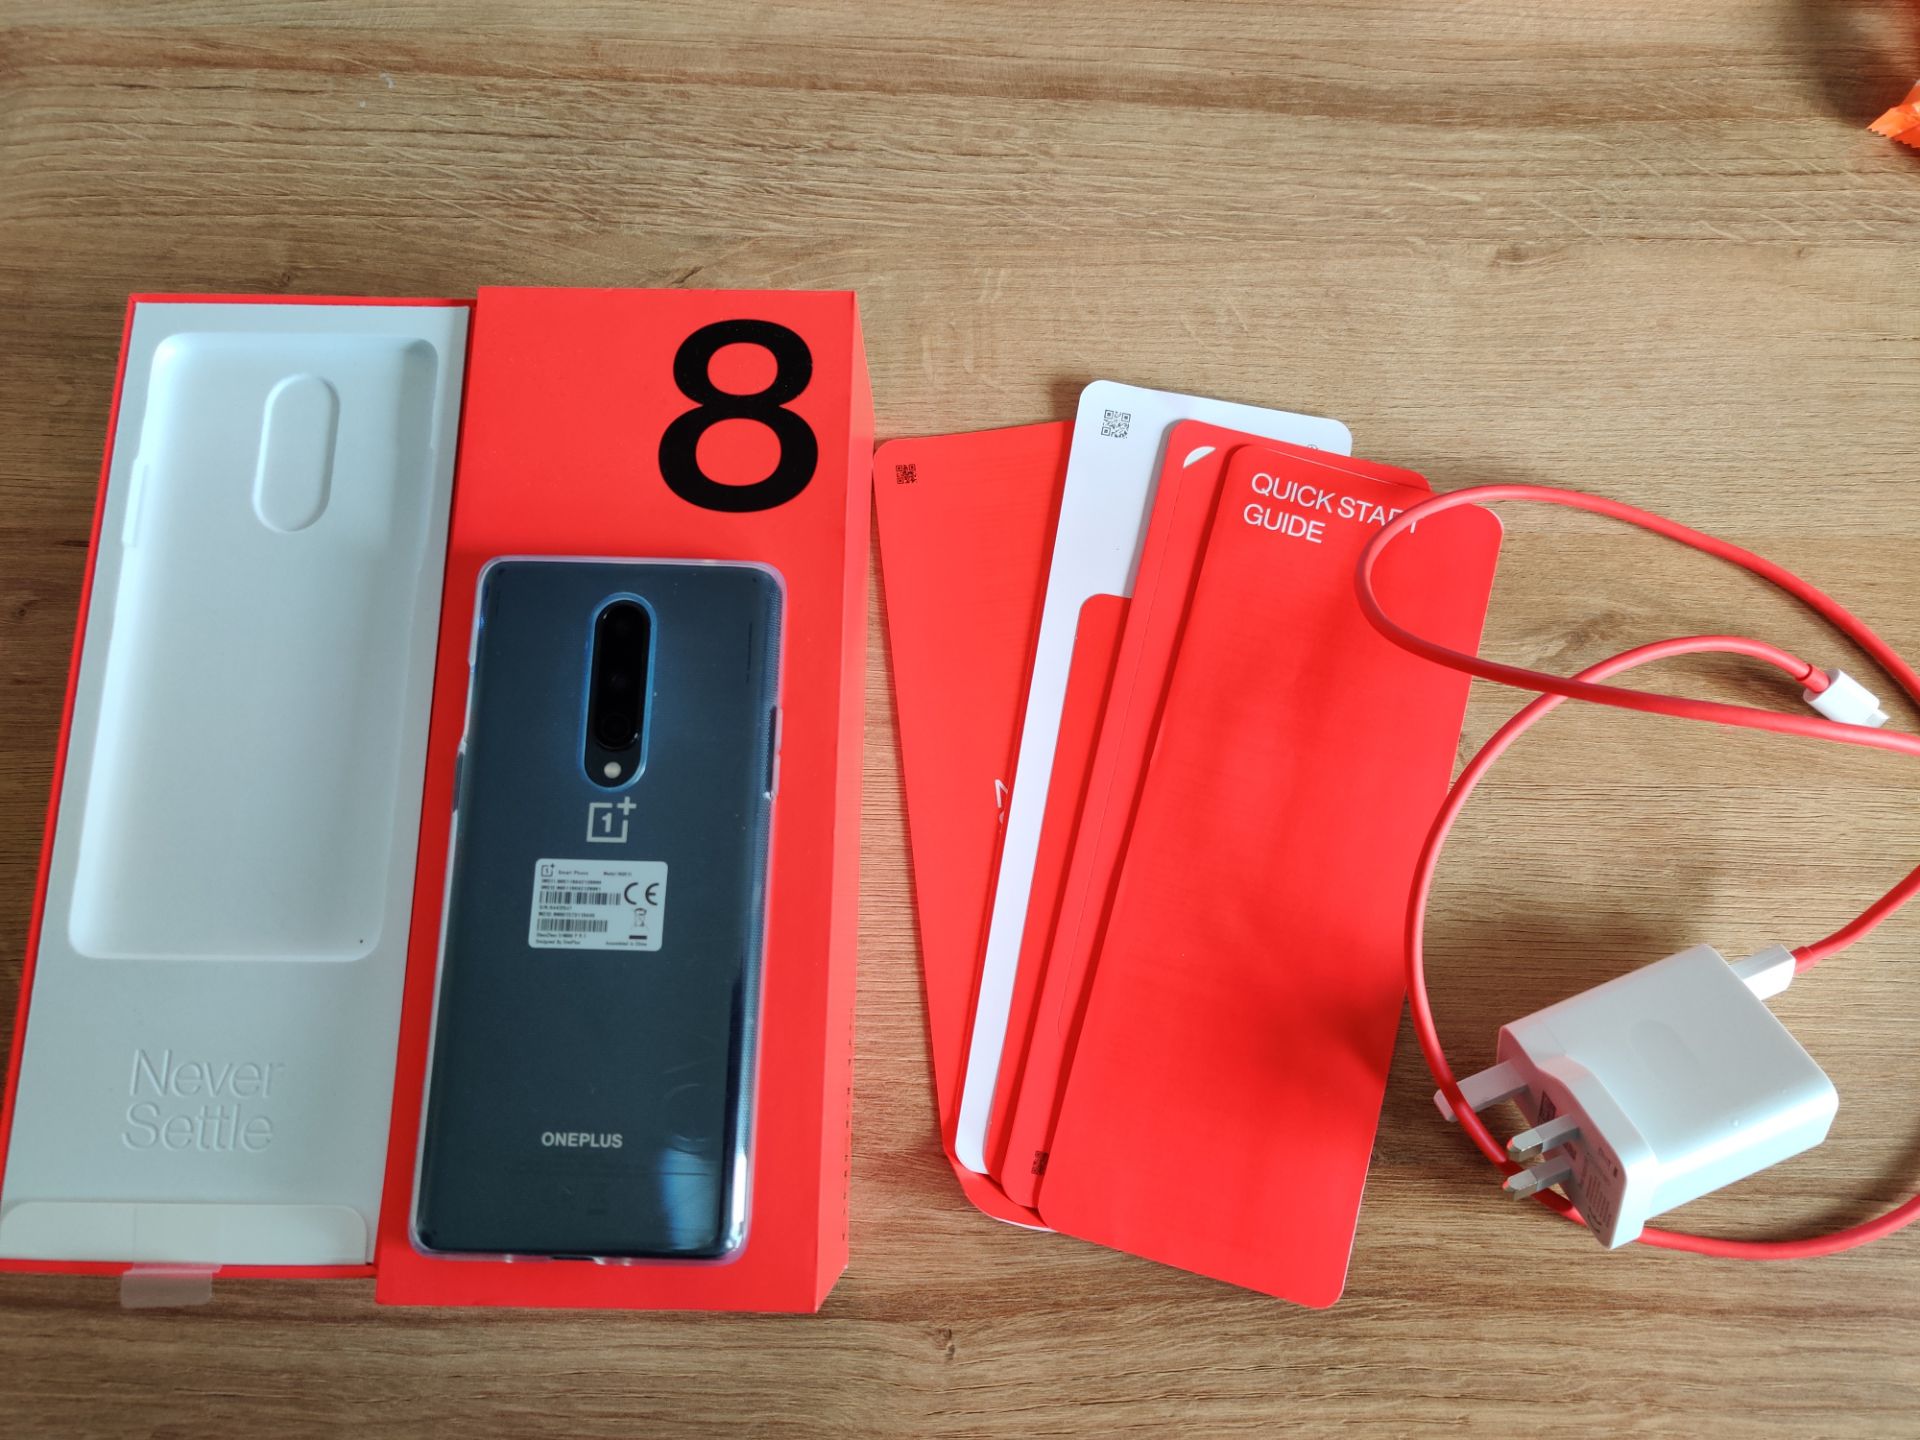 LIKE NEW! IMMACULATE CONDITION! ONEPLUS 8 128GB BLACK, UNLOCKED SMARTPHONE - LESS THAN A MONTH OLD! - Image 2 of 8